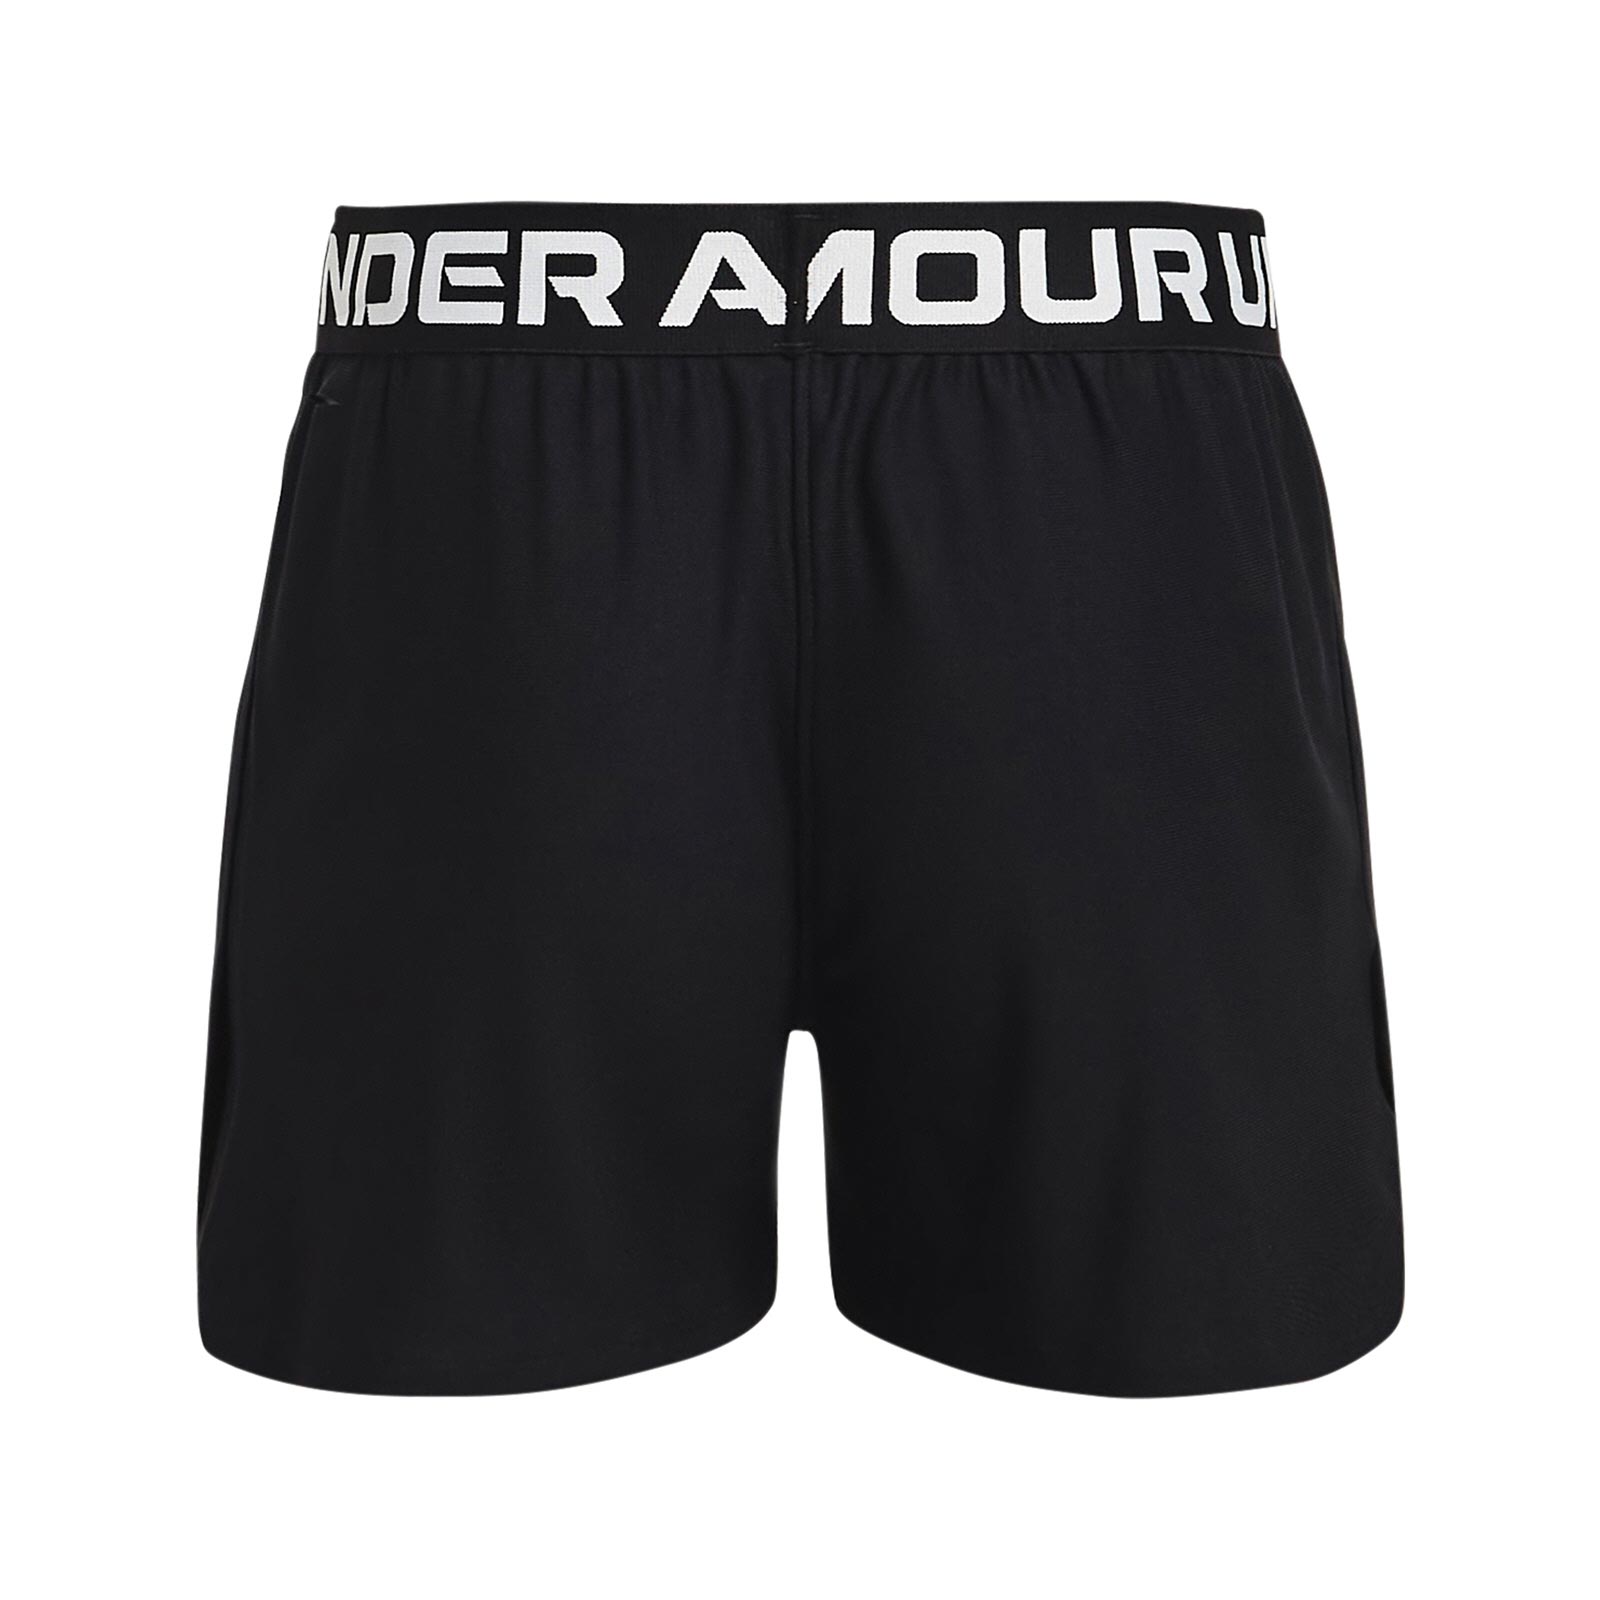 UNDER ARMOUR GIRLS PLAY UP SHORTS